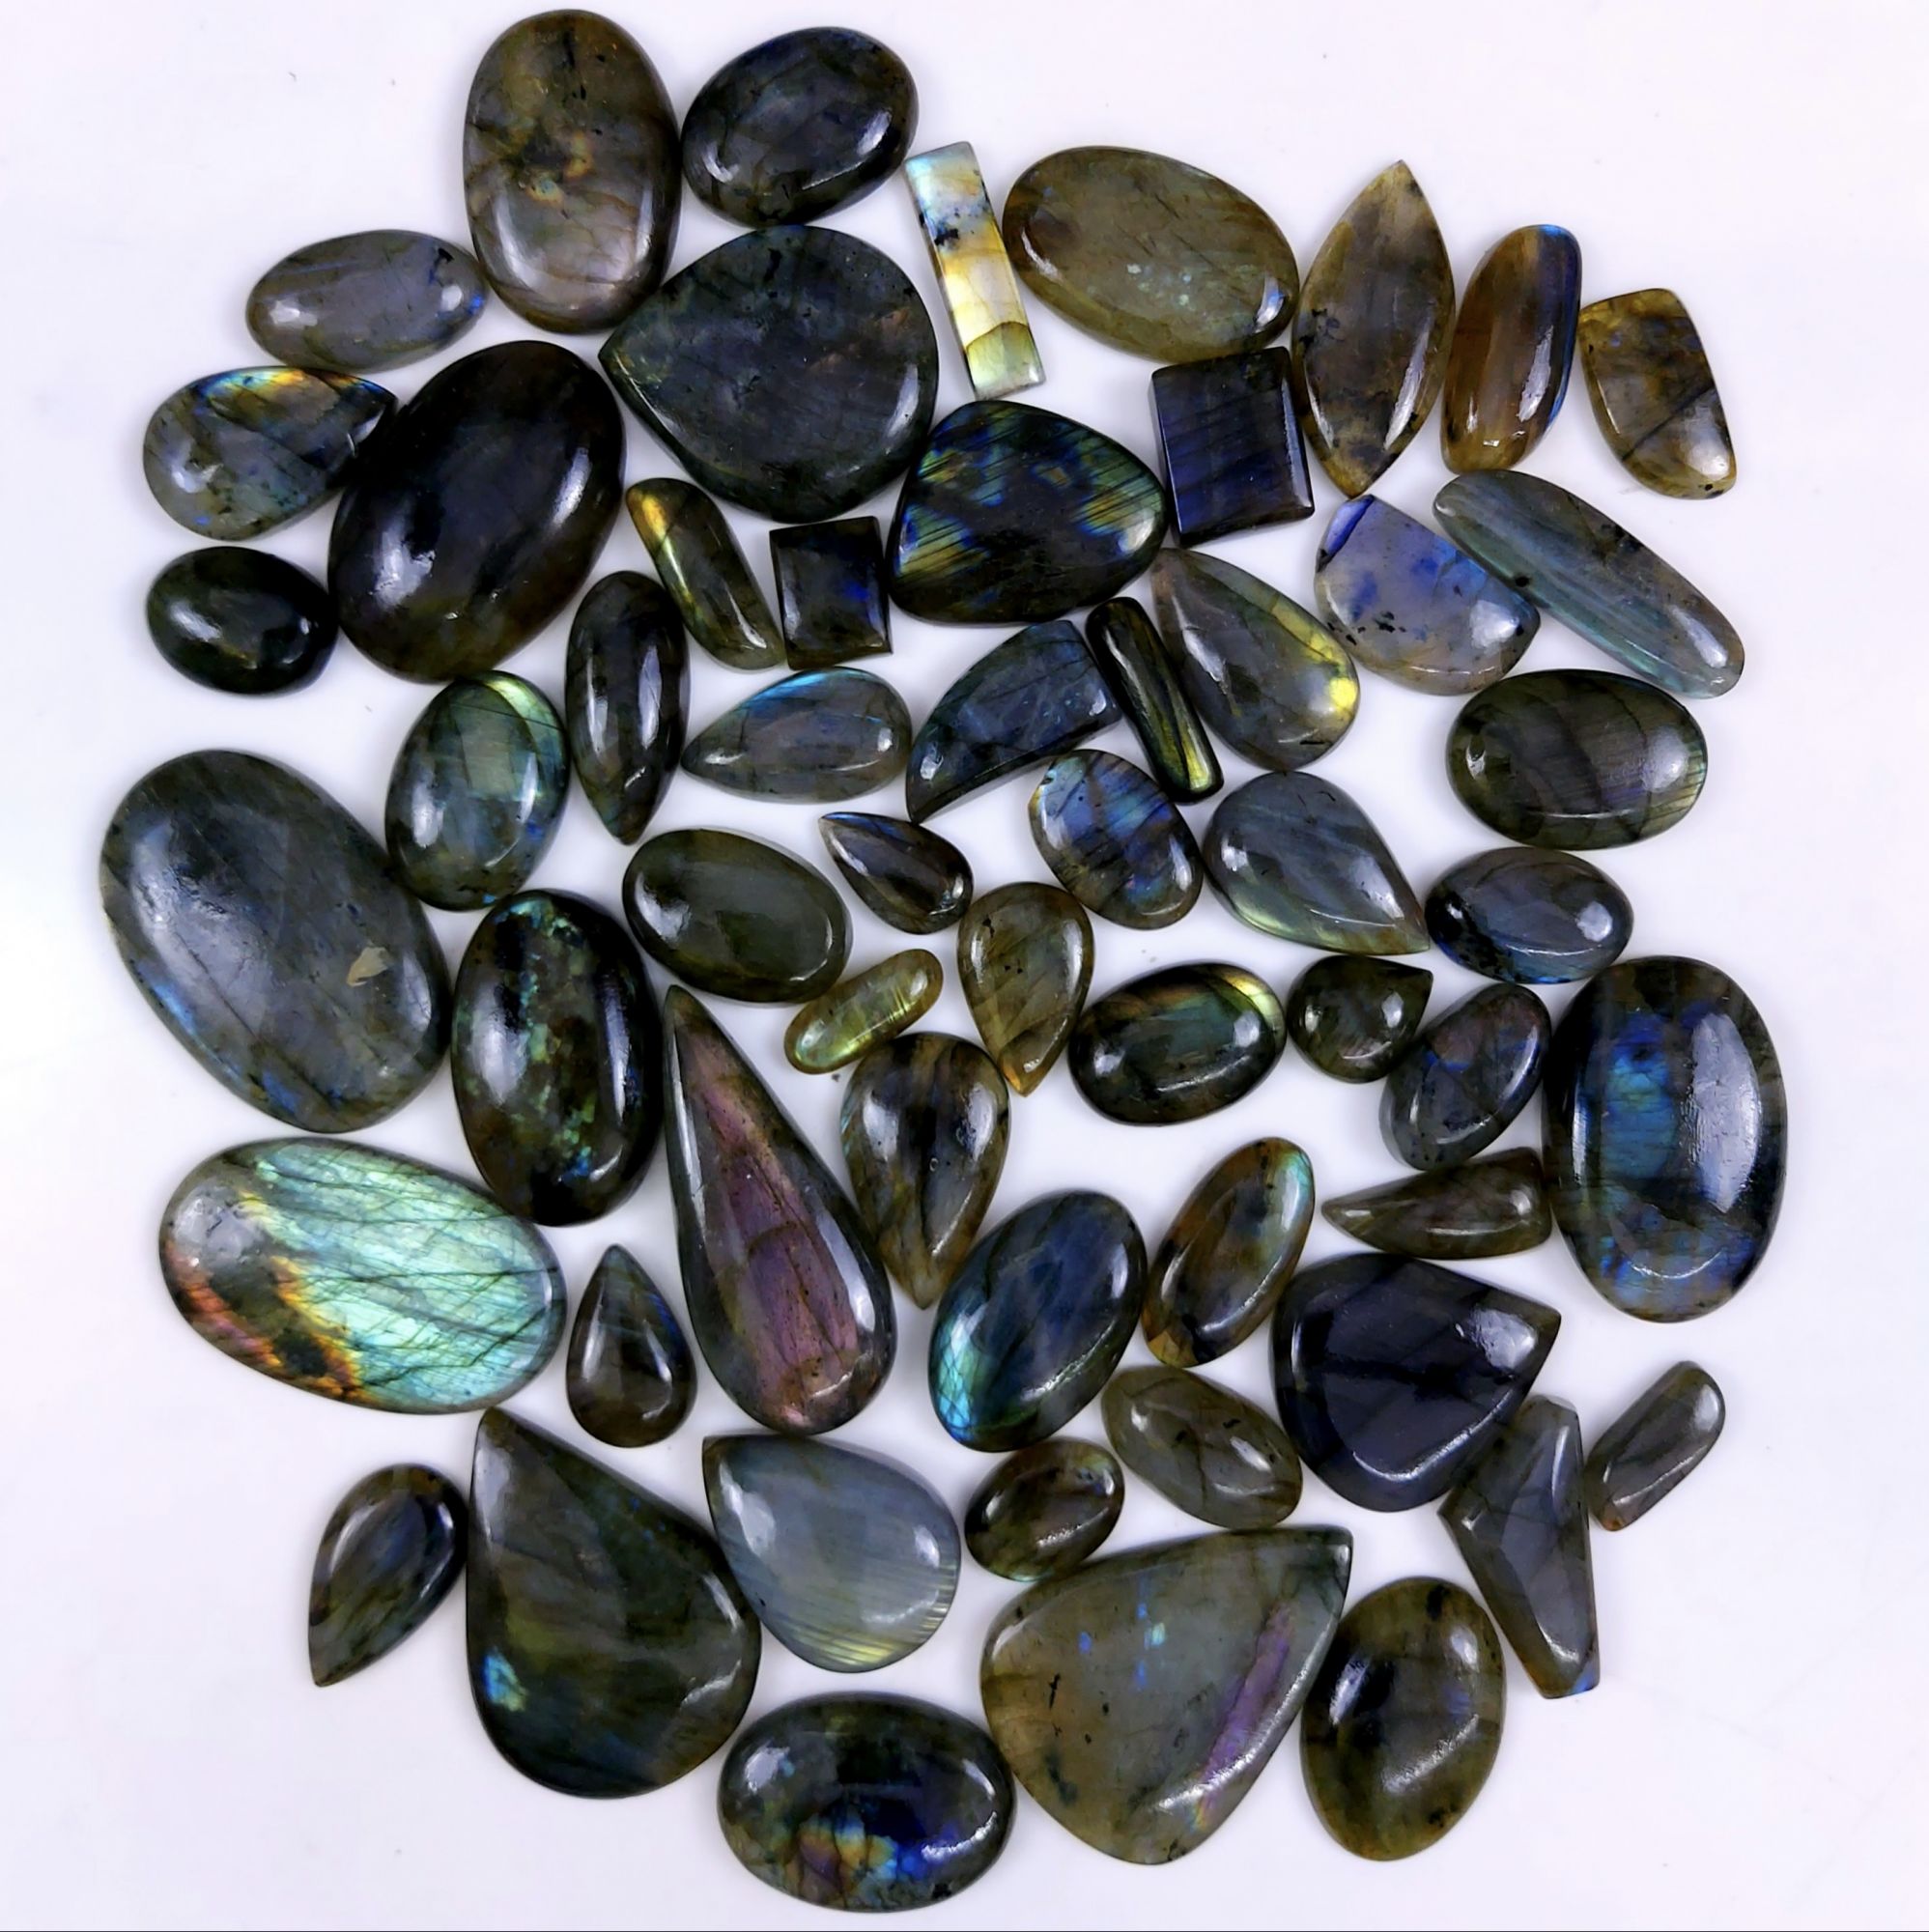 56pc 1824Cts Labradorite Cabochon Multifire Healing Crystal For Jewelry Supplies, Labradorite Necklace Handmade Wire Wrapped Gemstone Pendant 45x35 18x14mm#6347